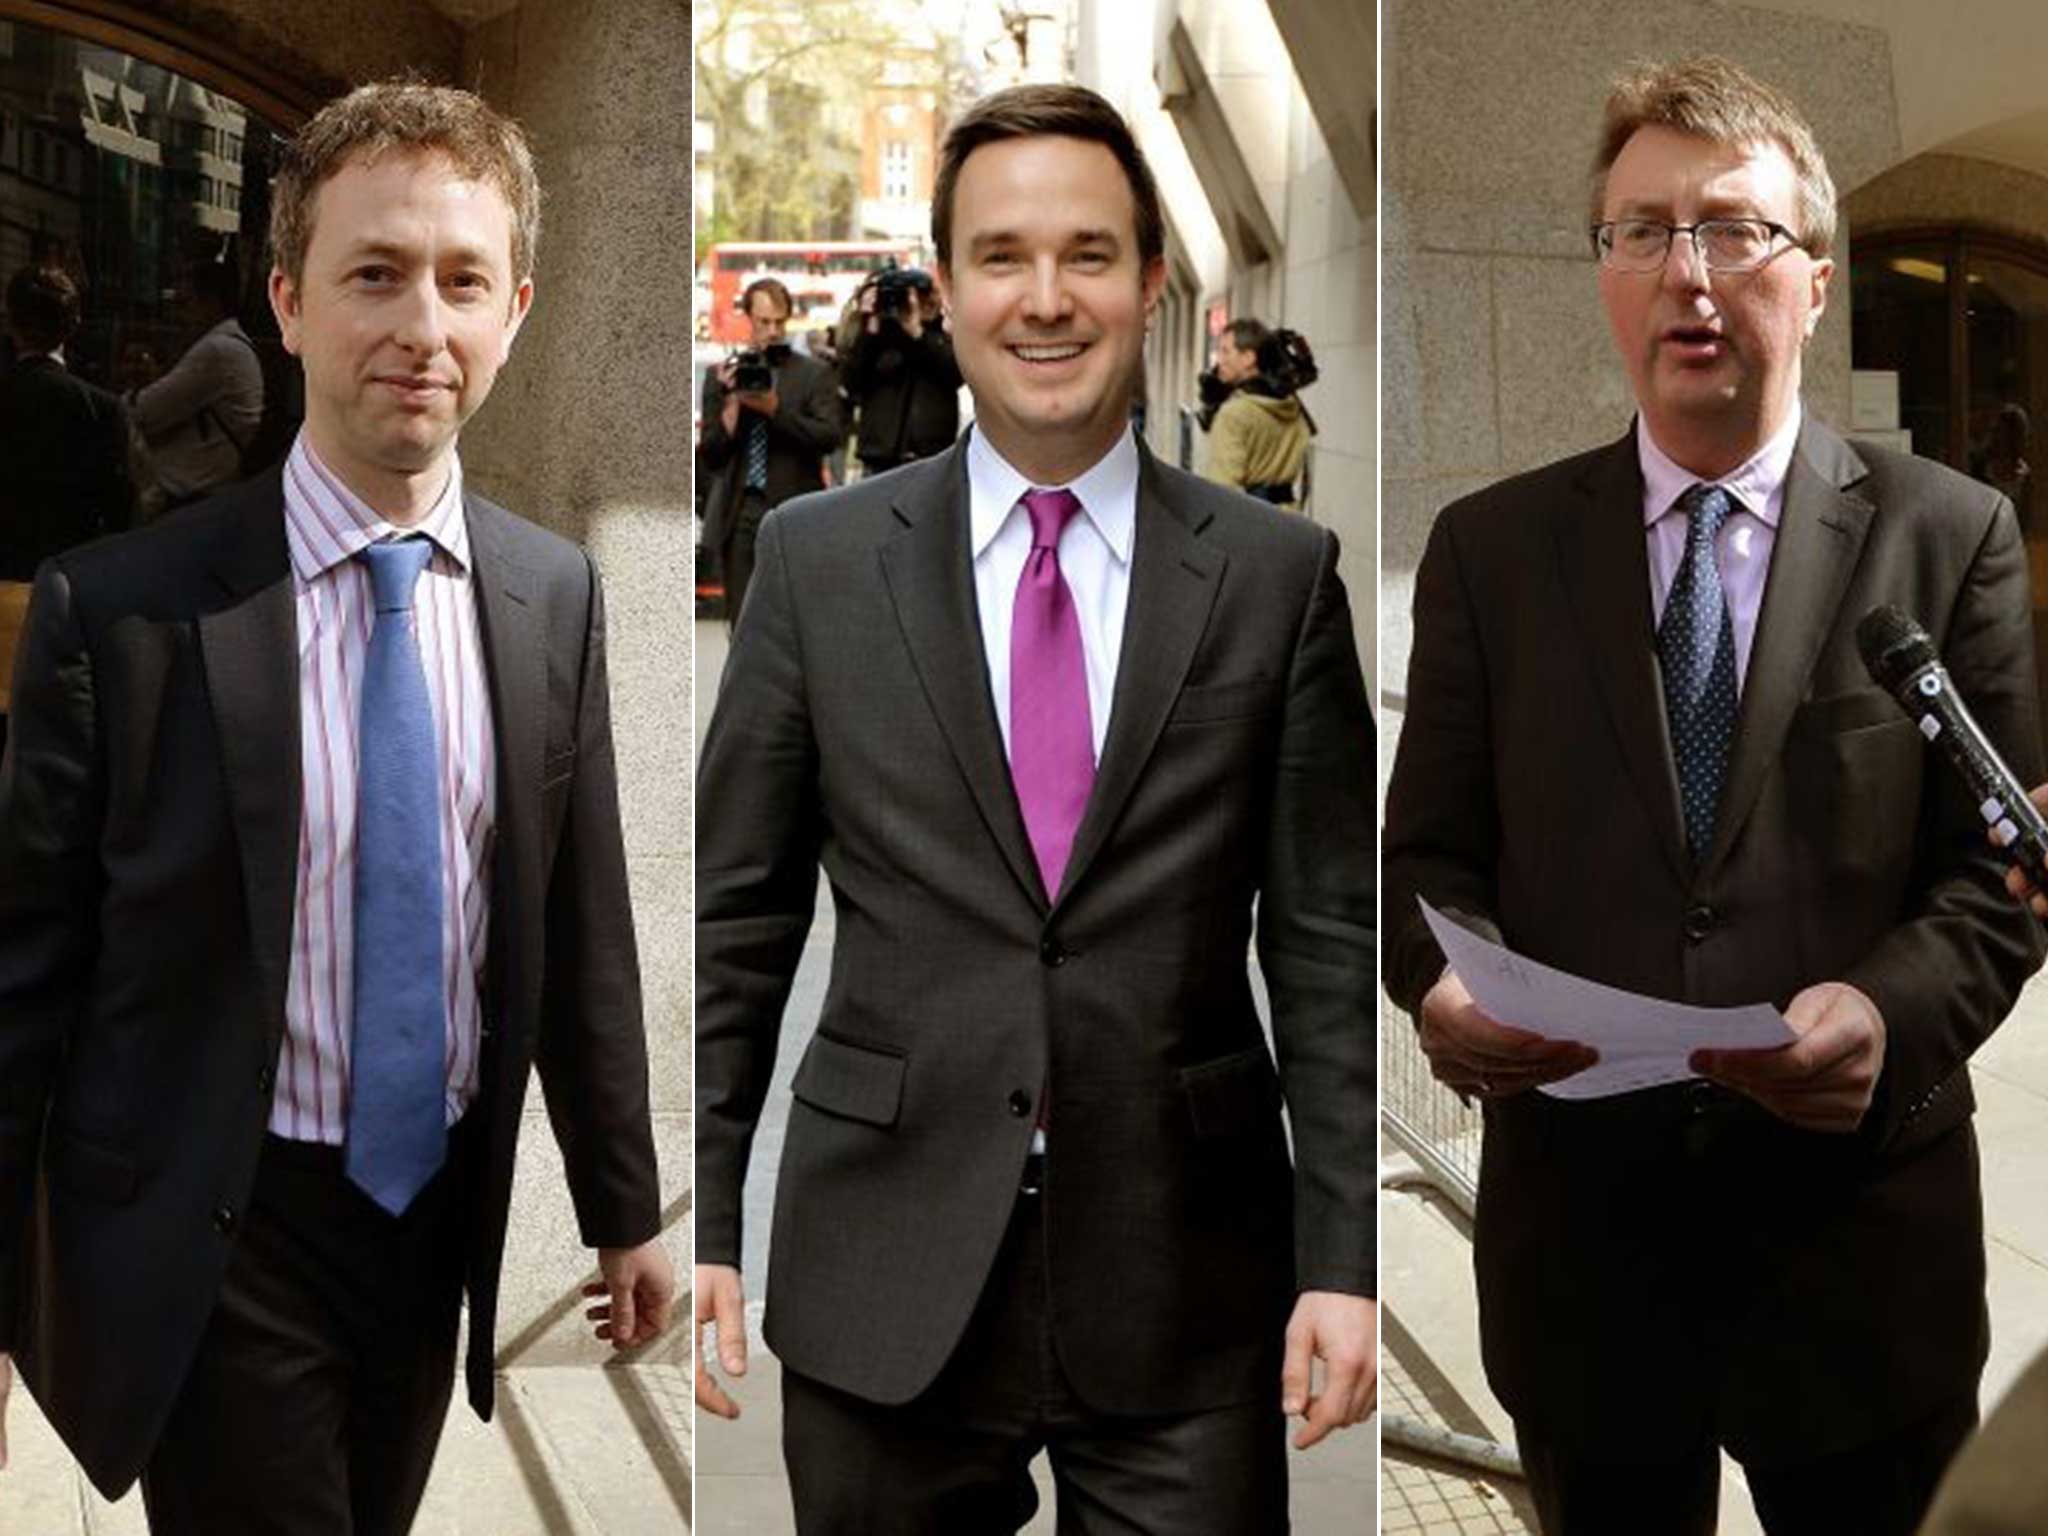 From left, the ‘Sun’ reporters Neil Millard and Tom Wells, and Graham Brough, formerly of the ‘Daily Mirror’, leaving the Old Bailey after they were cleared of charges of paying officials for stories